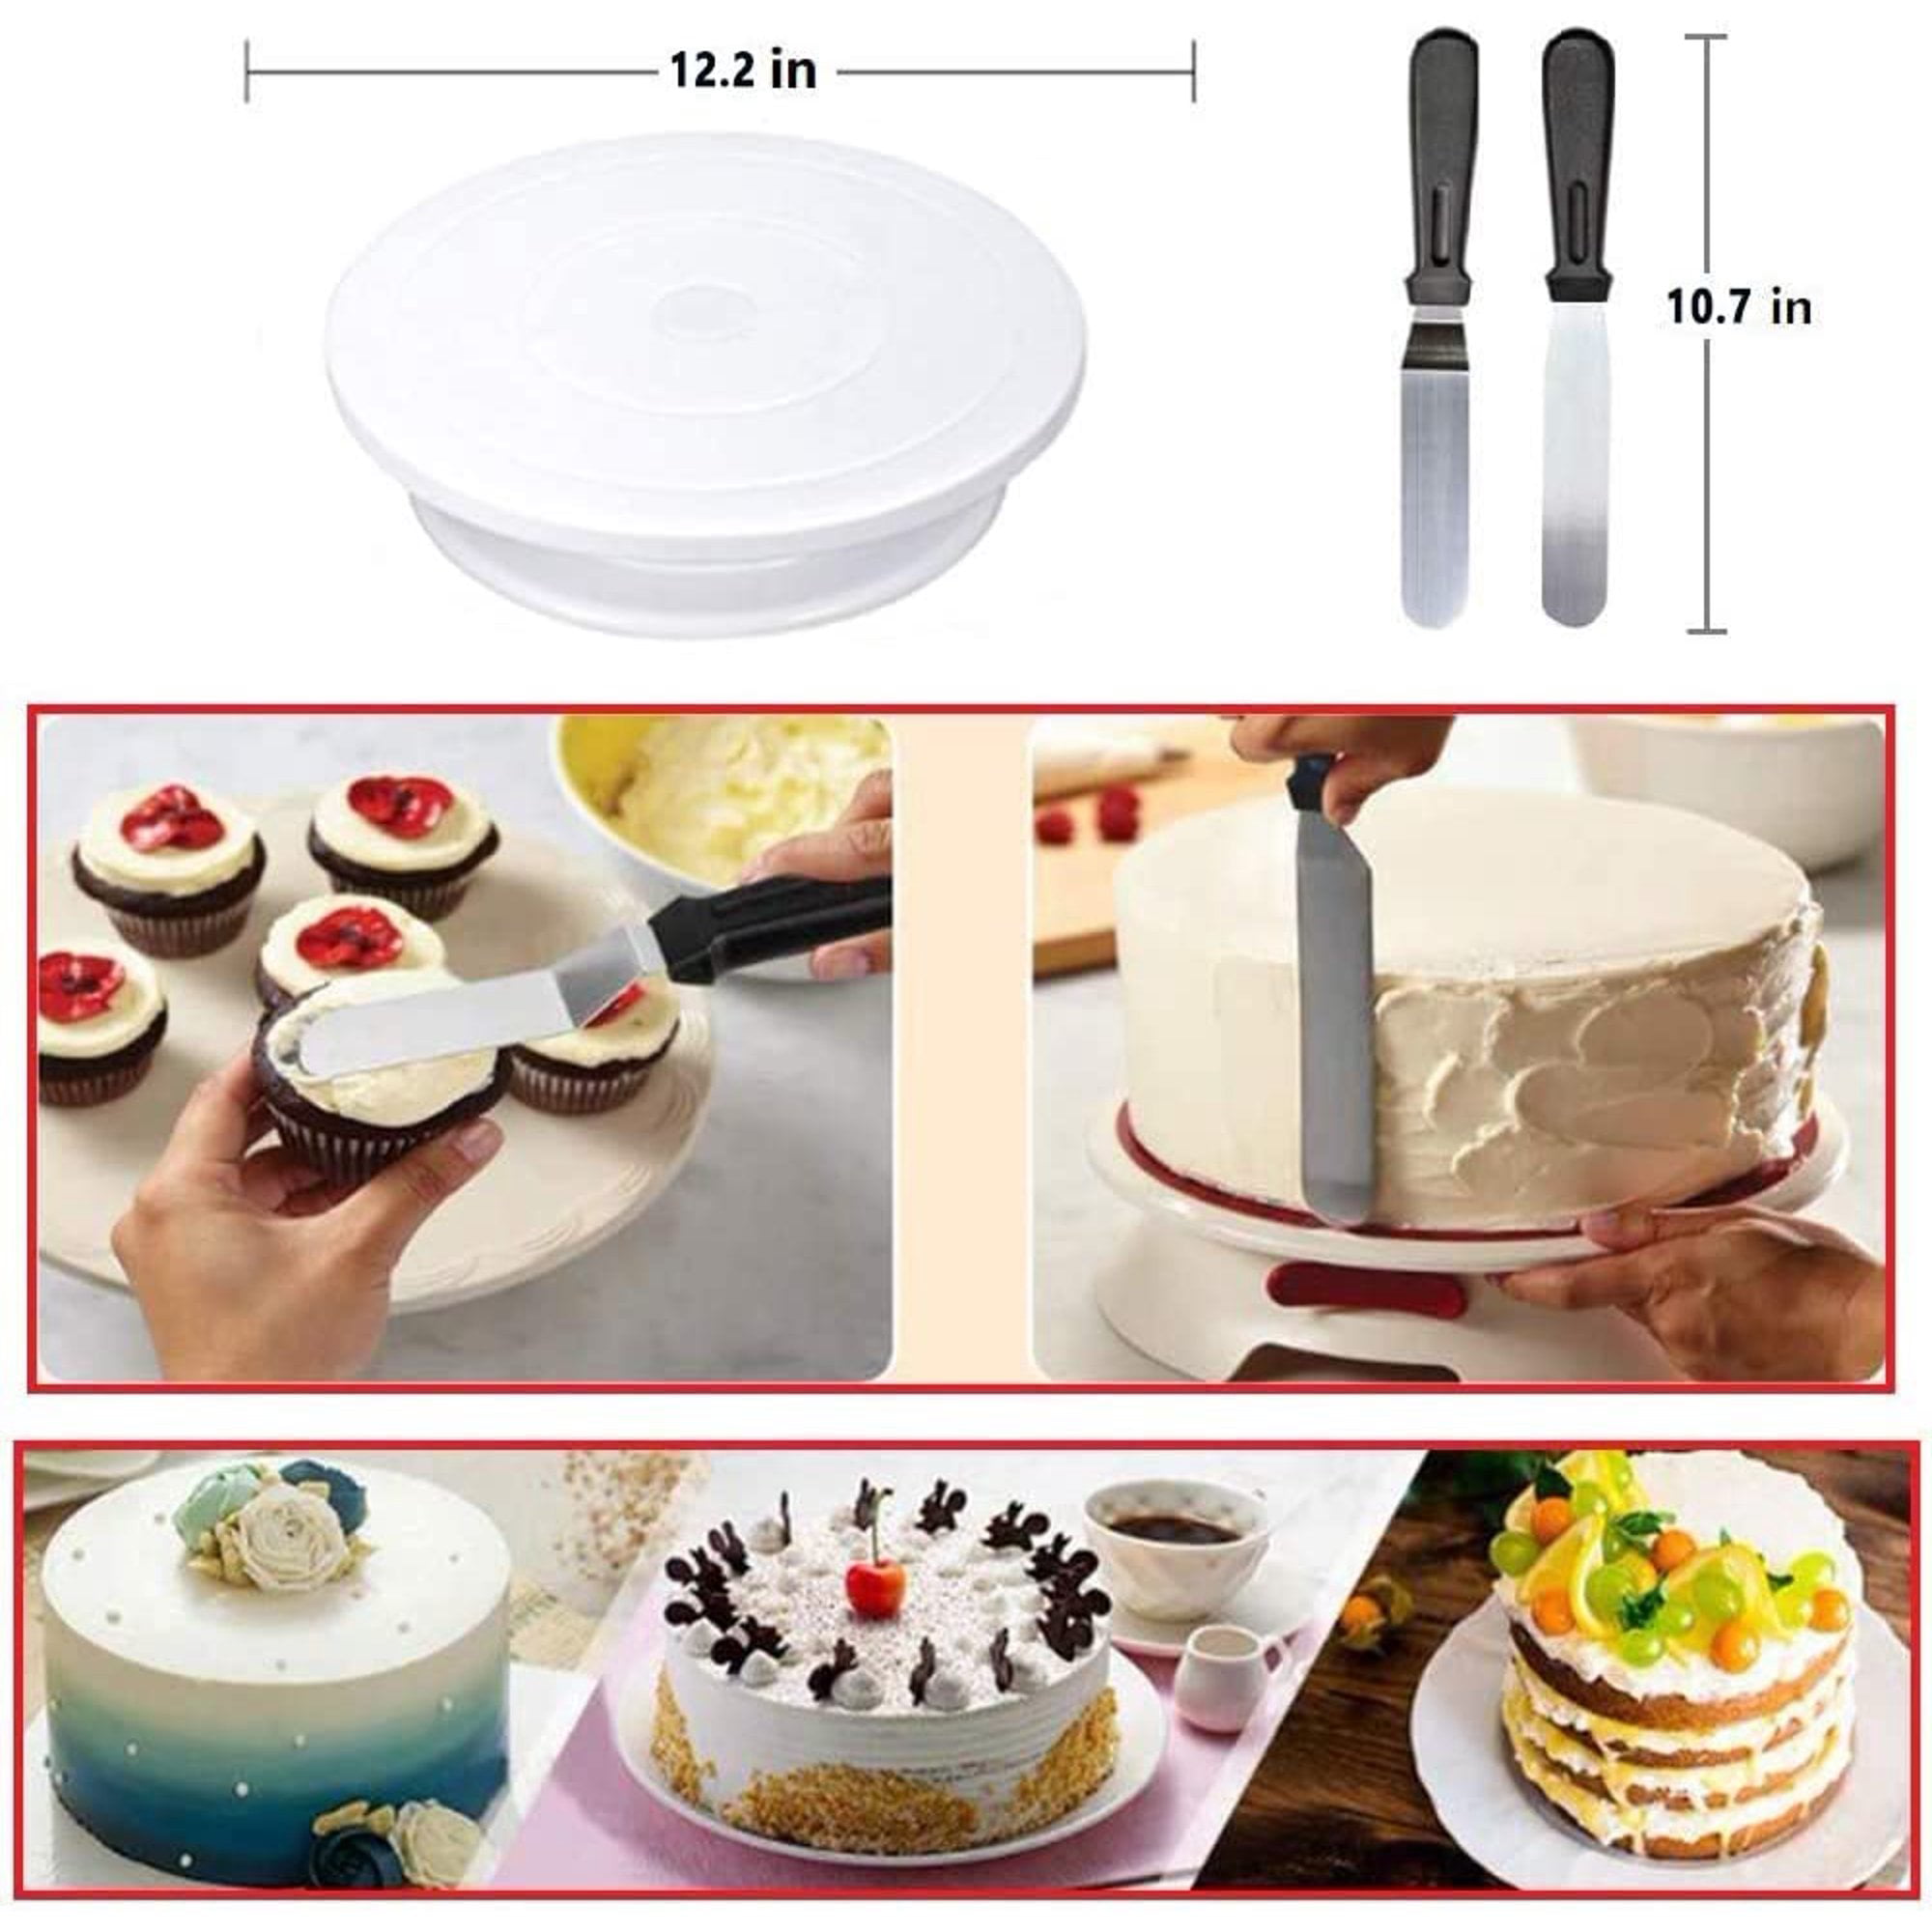 469x Cake Decorating Kit Baking Supplies with Rotating Turntable